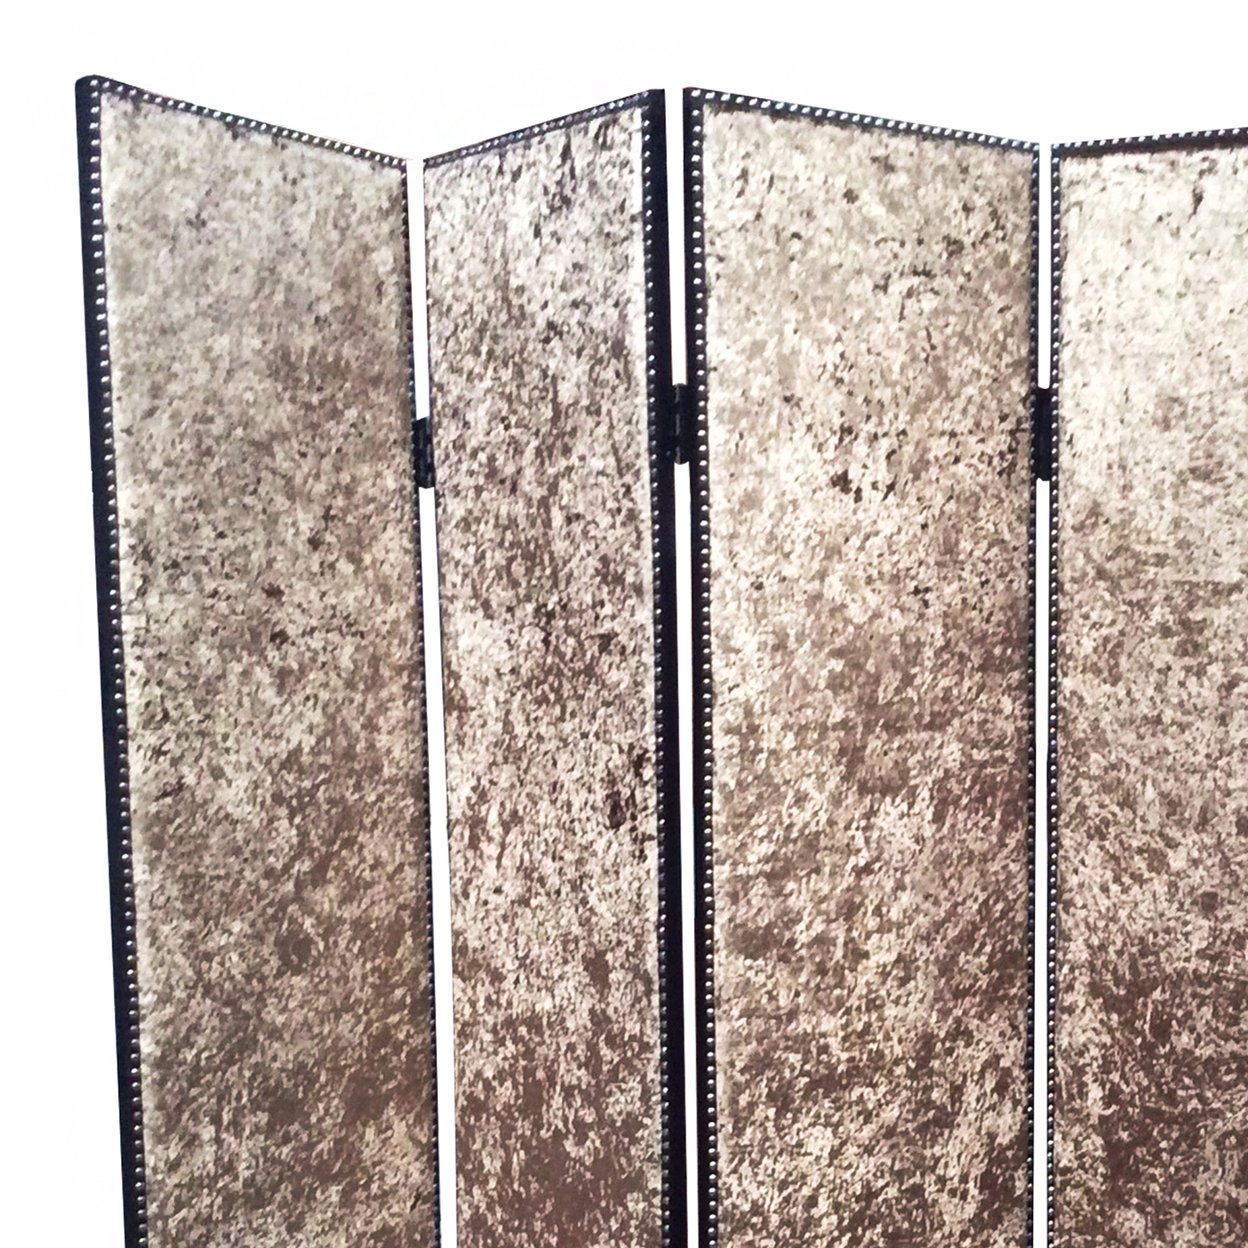 Wood And Fabric 4 Panel Foldable Screen With Textured Details, Brown- Saltoro Sherpi